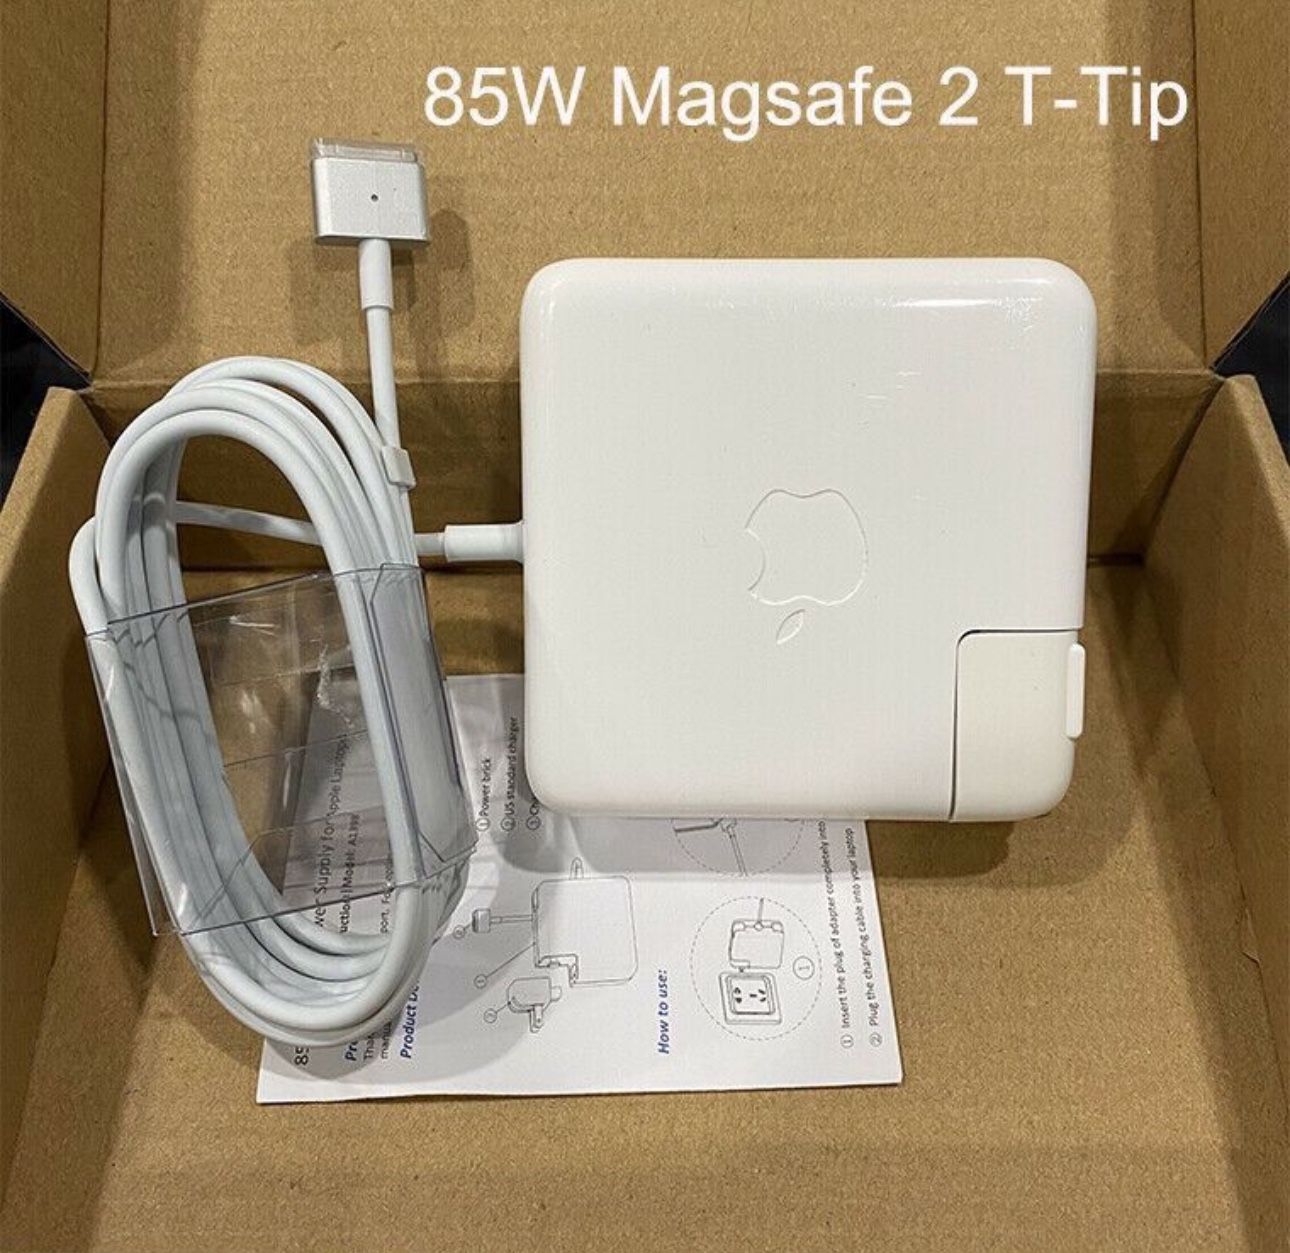 85W MagSafe 2 Power Adapter T-tip Charger For MacBook Pro  Retina 15”, 17” 2013-2019, A1398 